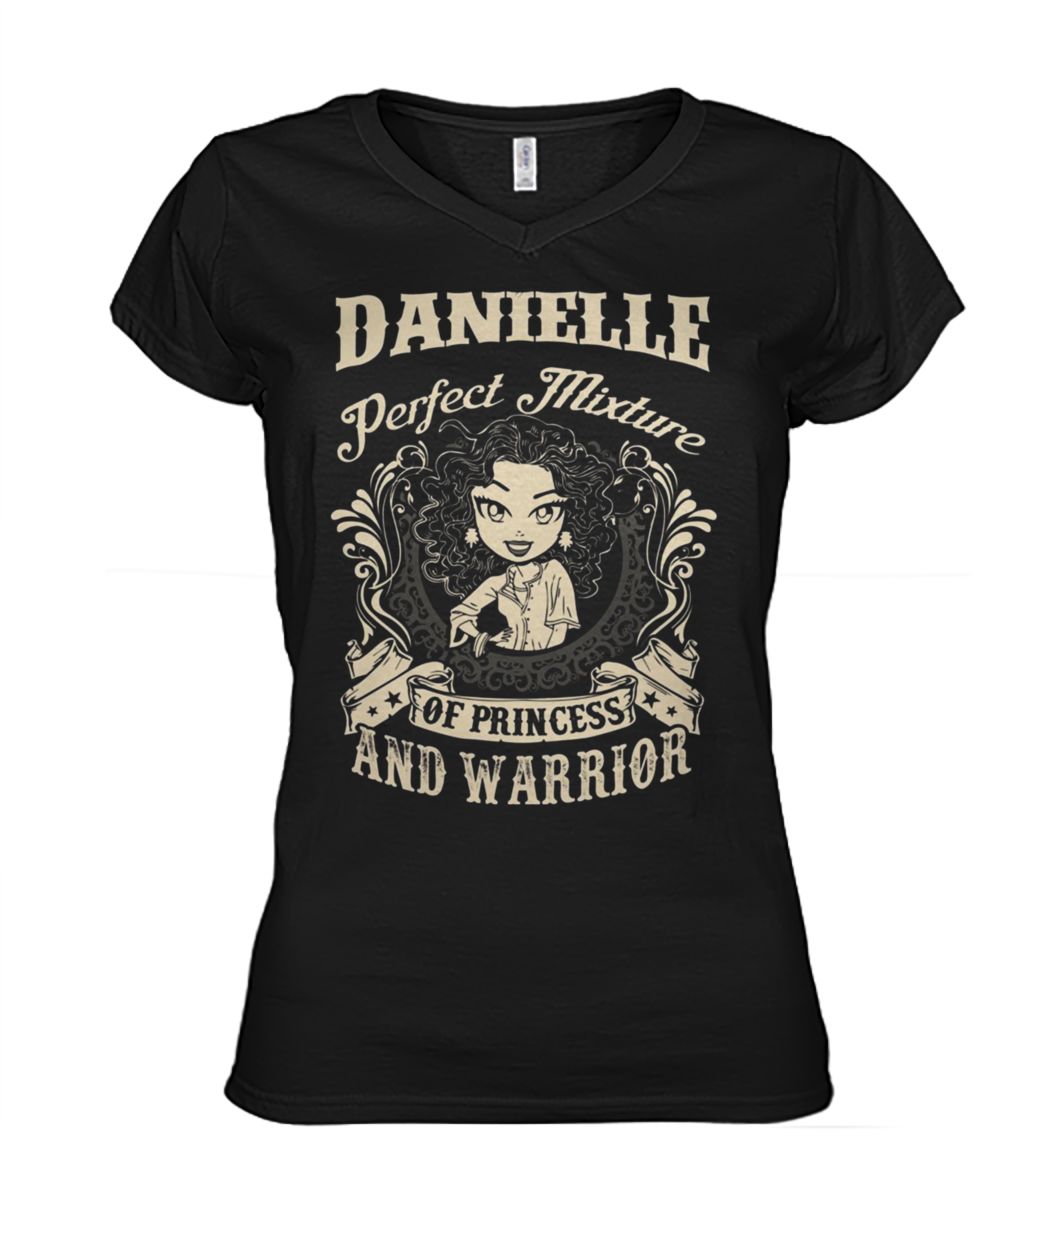 Danielle perfect combination of a princess and warrior women's v-neck